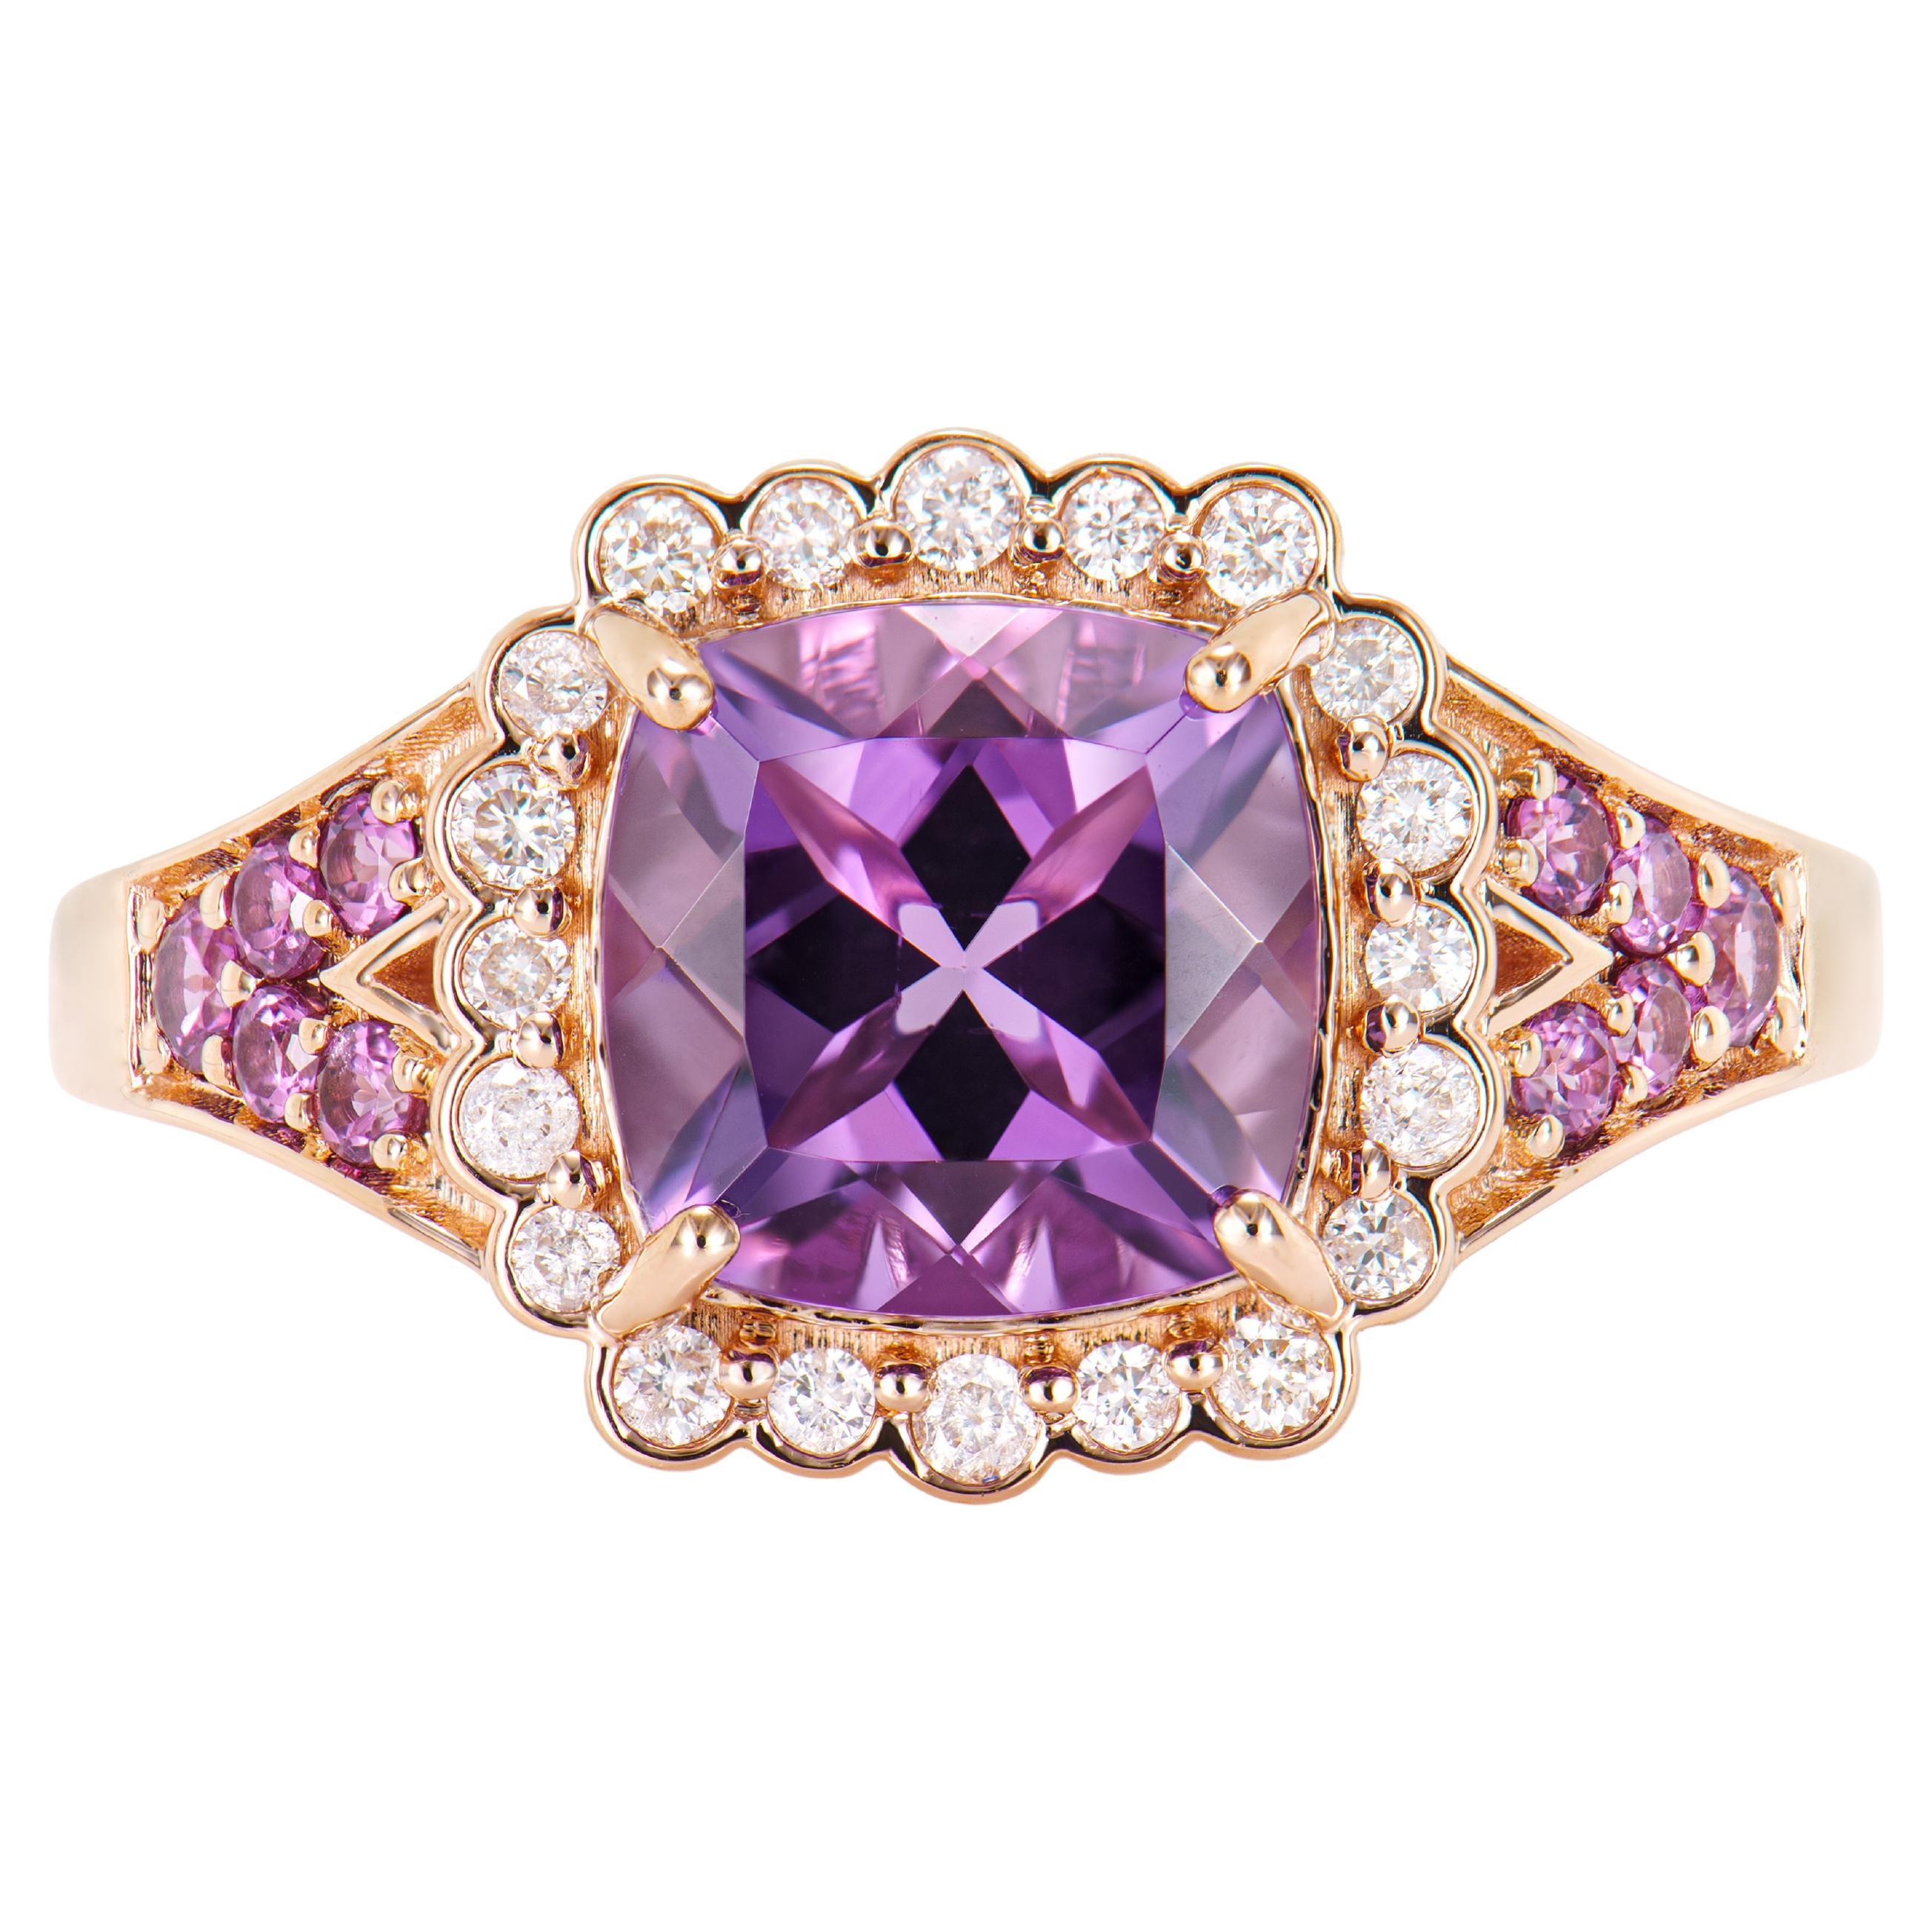 2.05 Carat Amethyst Fancy Ring in 14KRG with Rhodolite and White Diamond.  